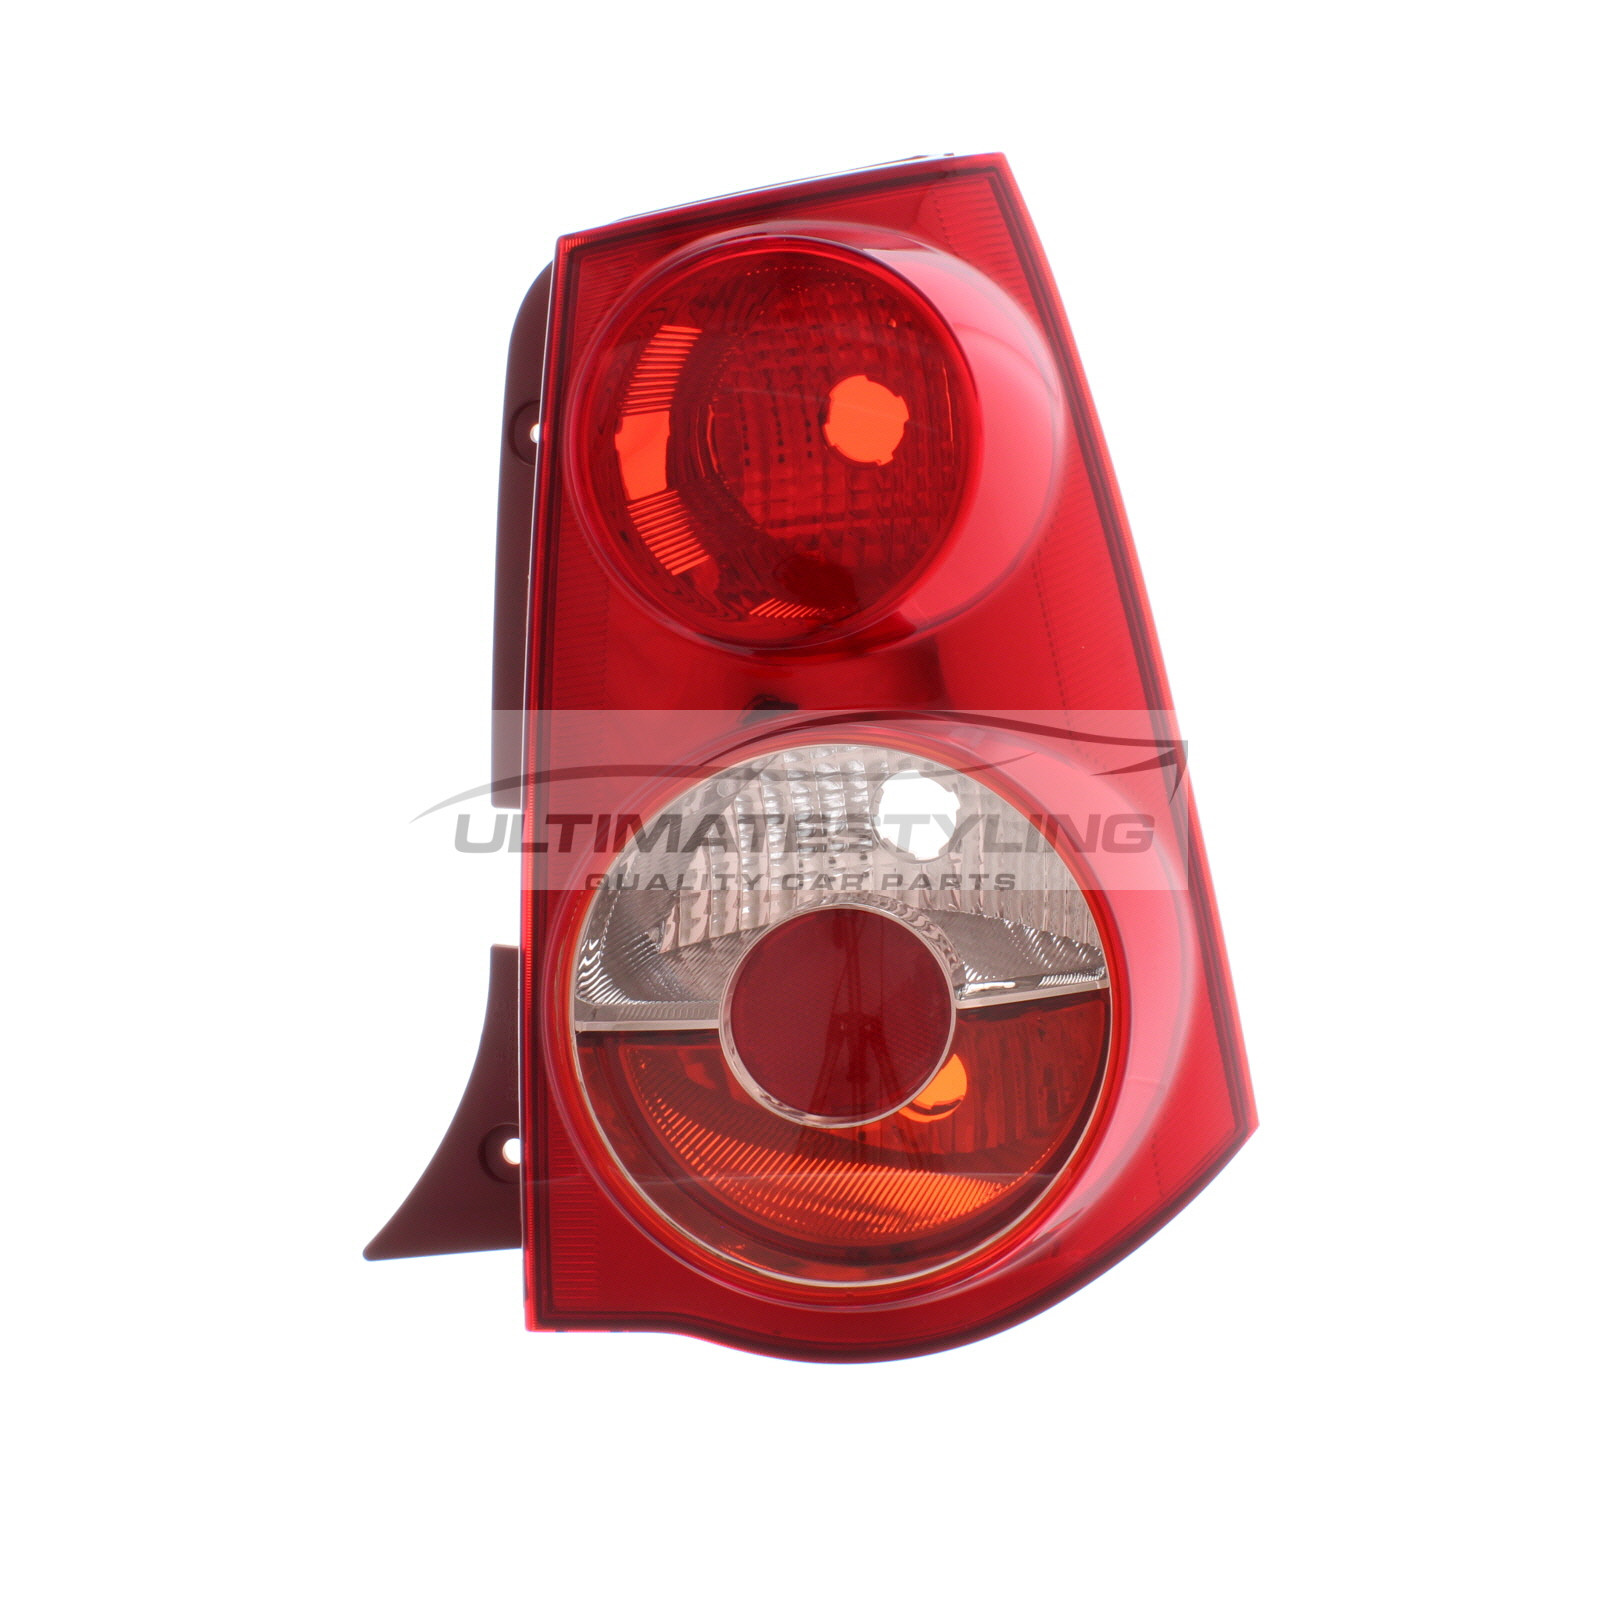 Kia Picanto 2007-2011 Non-LED Rear Light / Tail Light Excluding Bulb Holder Drivers Side (RH)